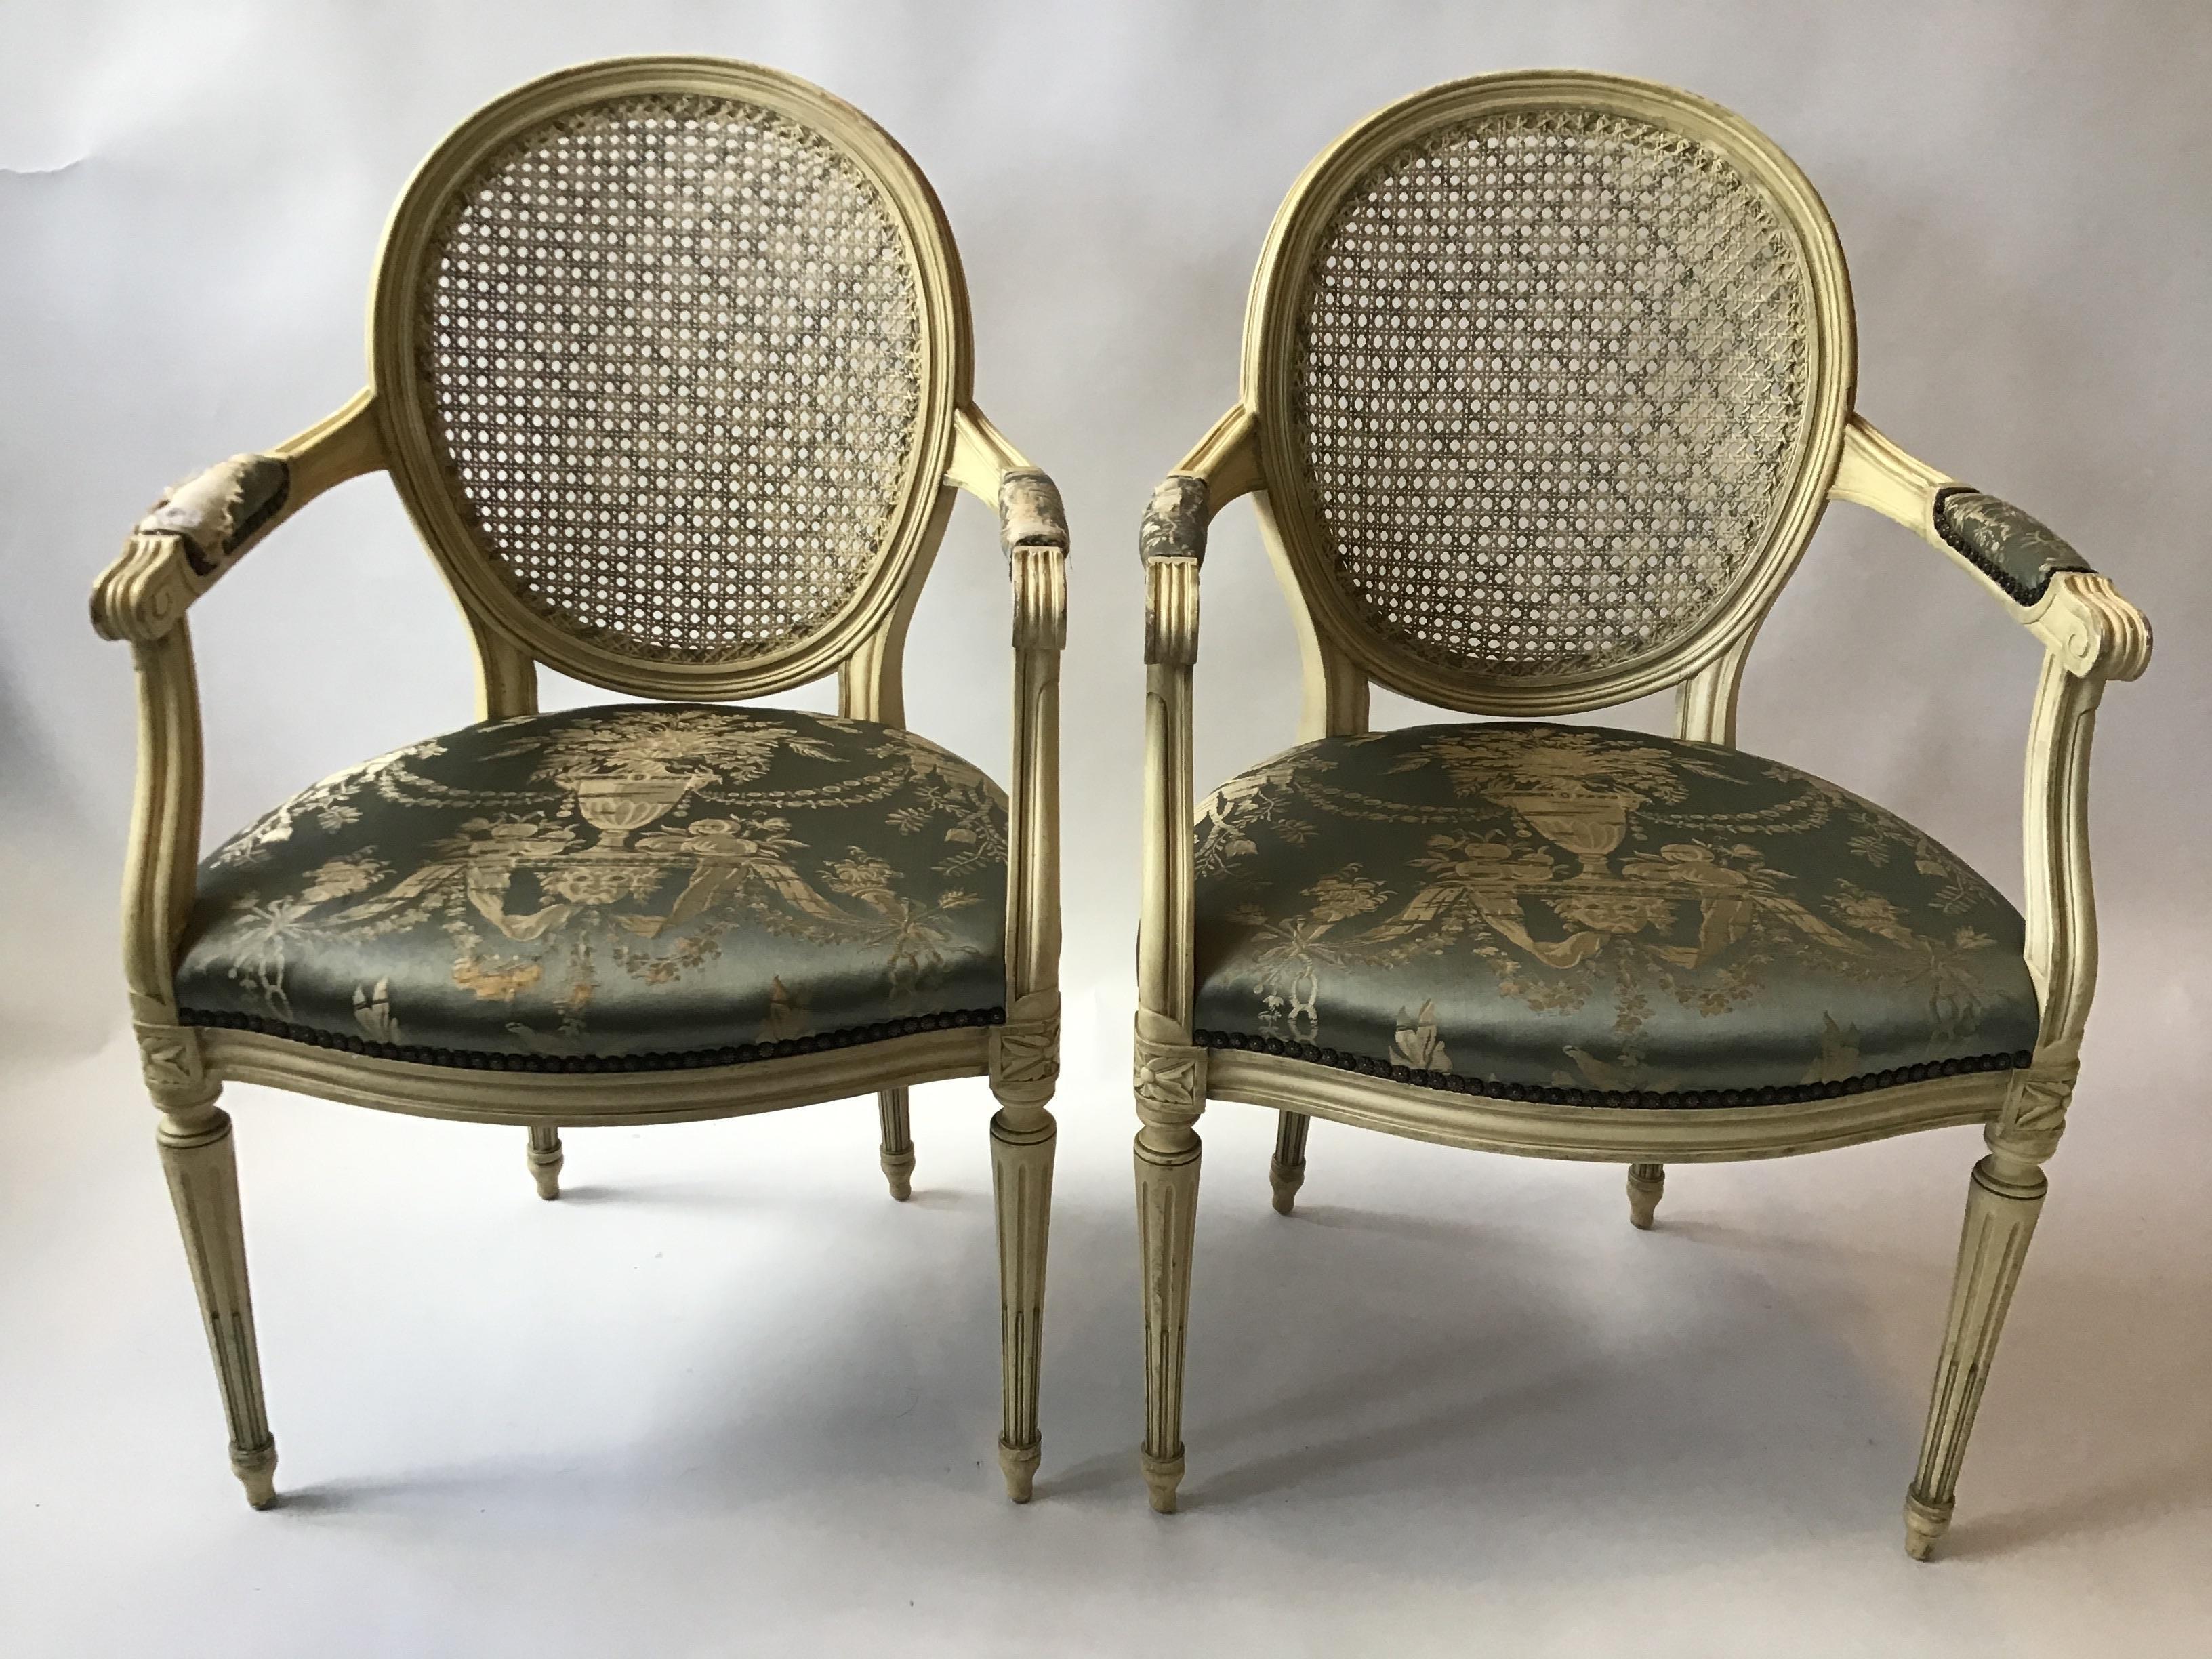 Pair of 1960s Louis XVI caned back armchairs. Painted stripes on the caning. Well made. Purchased from a Greenwich, Connecticut estate.